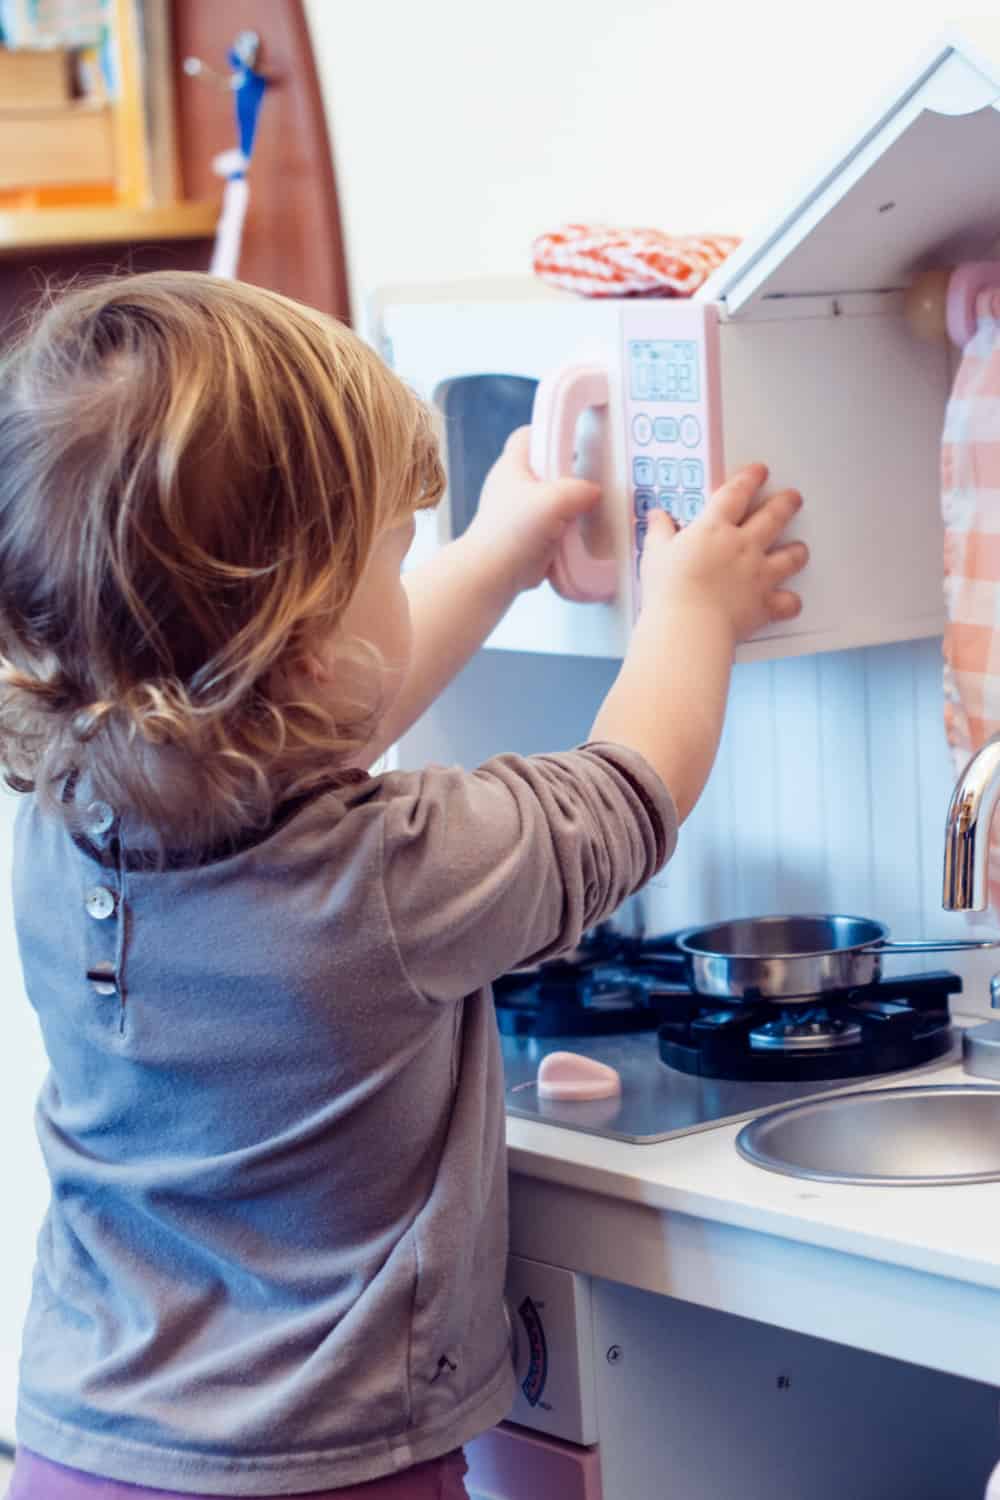 18 Homemade Kids’ Kitchen Plans You Can DIY Easily